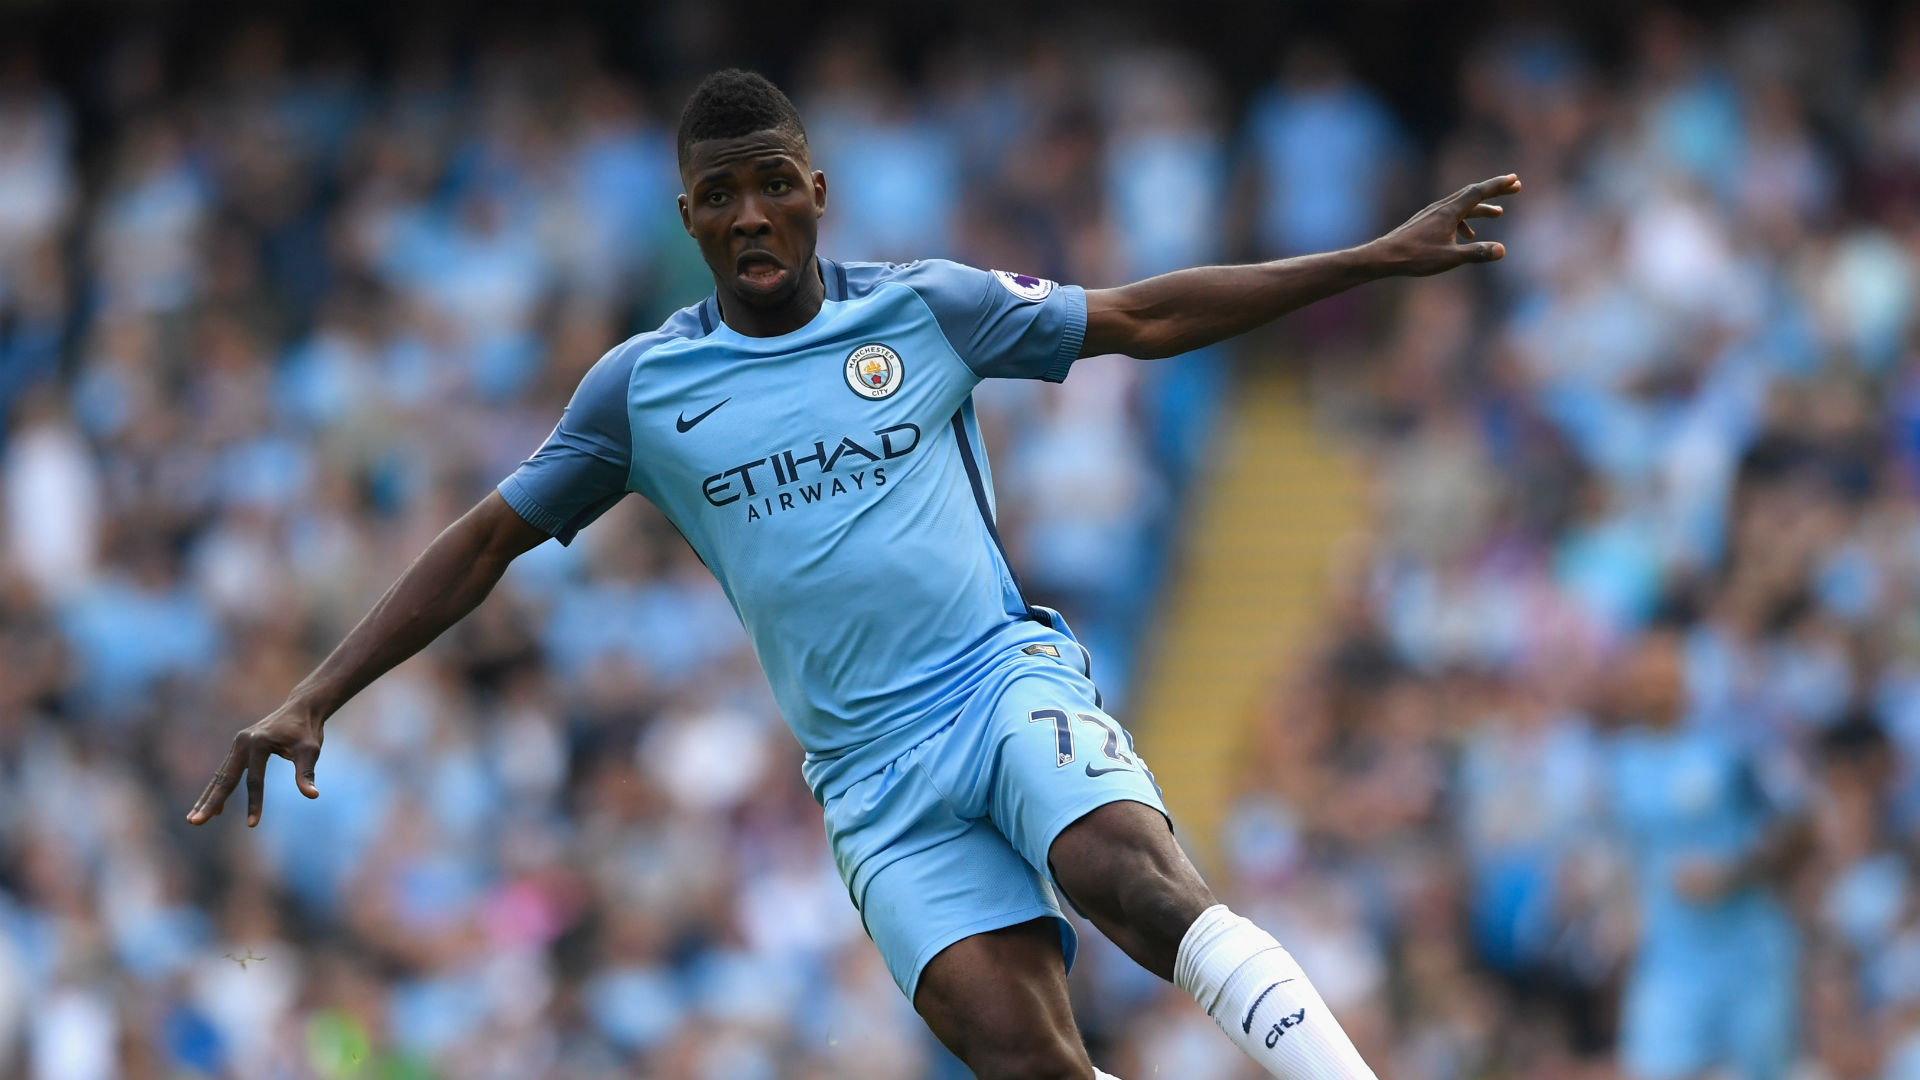 Man City striker Iheanacho wanted by two teams, claims former coach ...